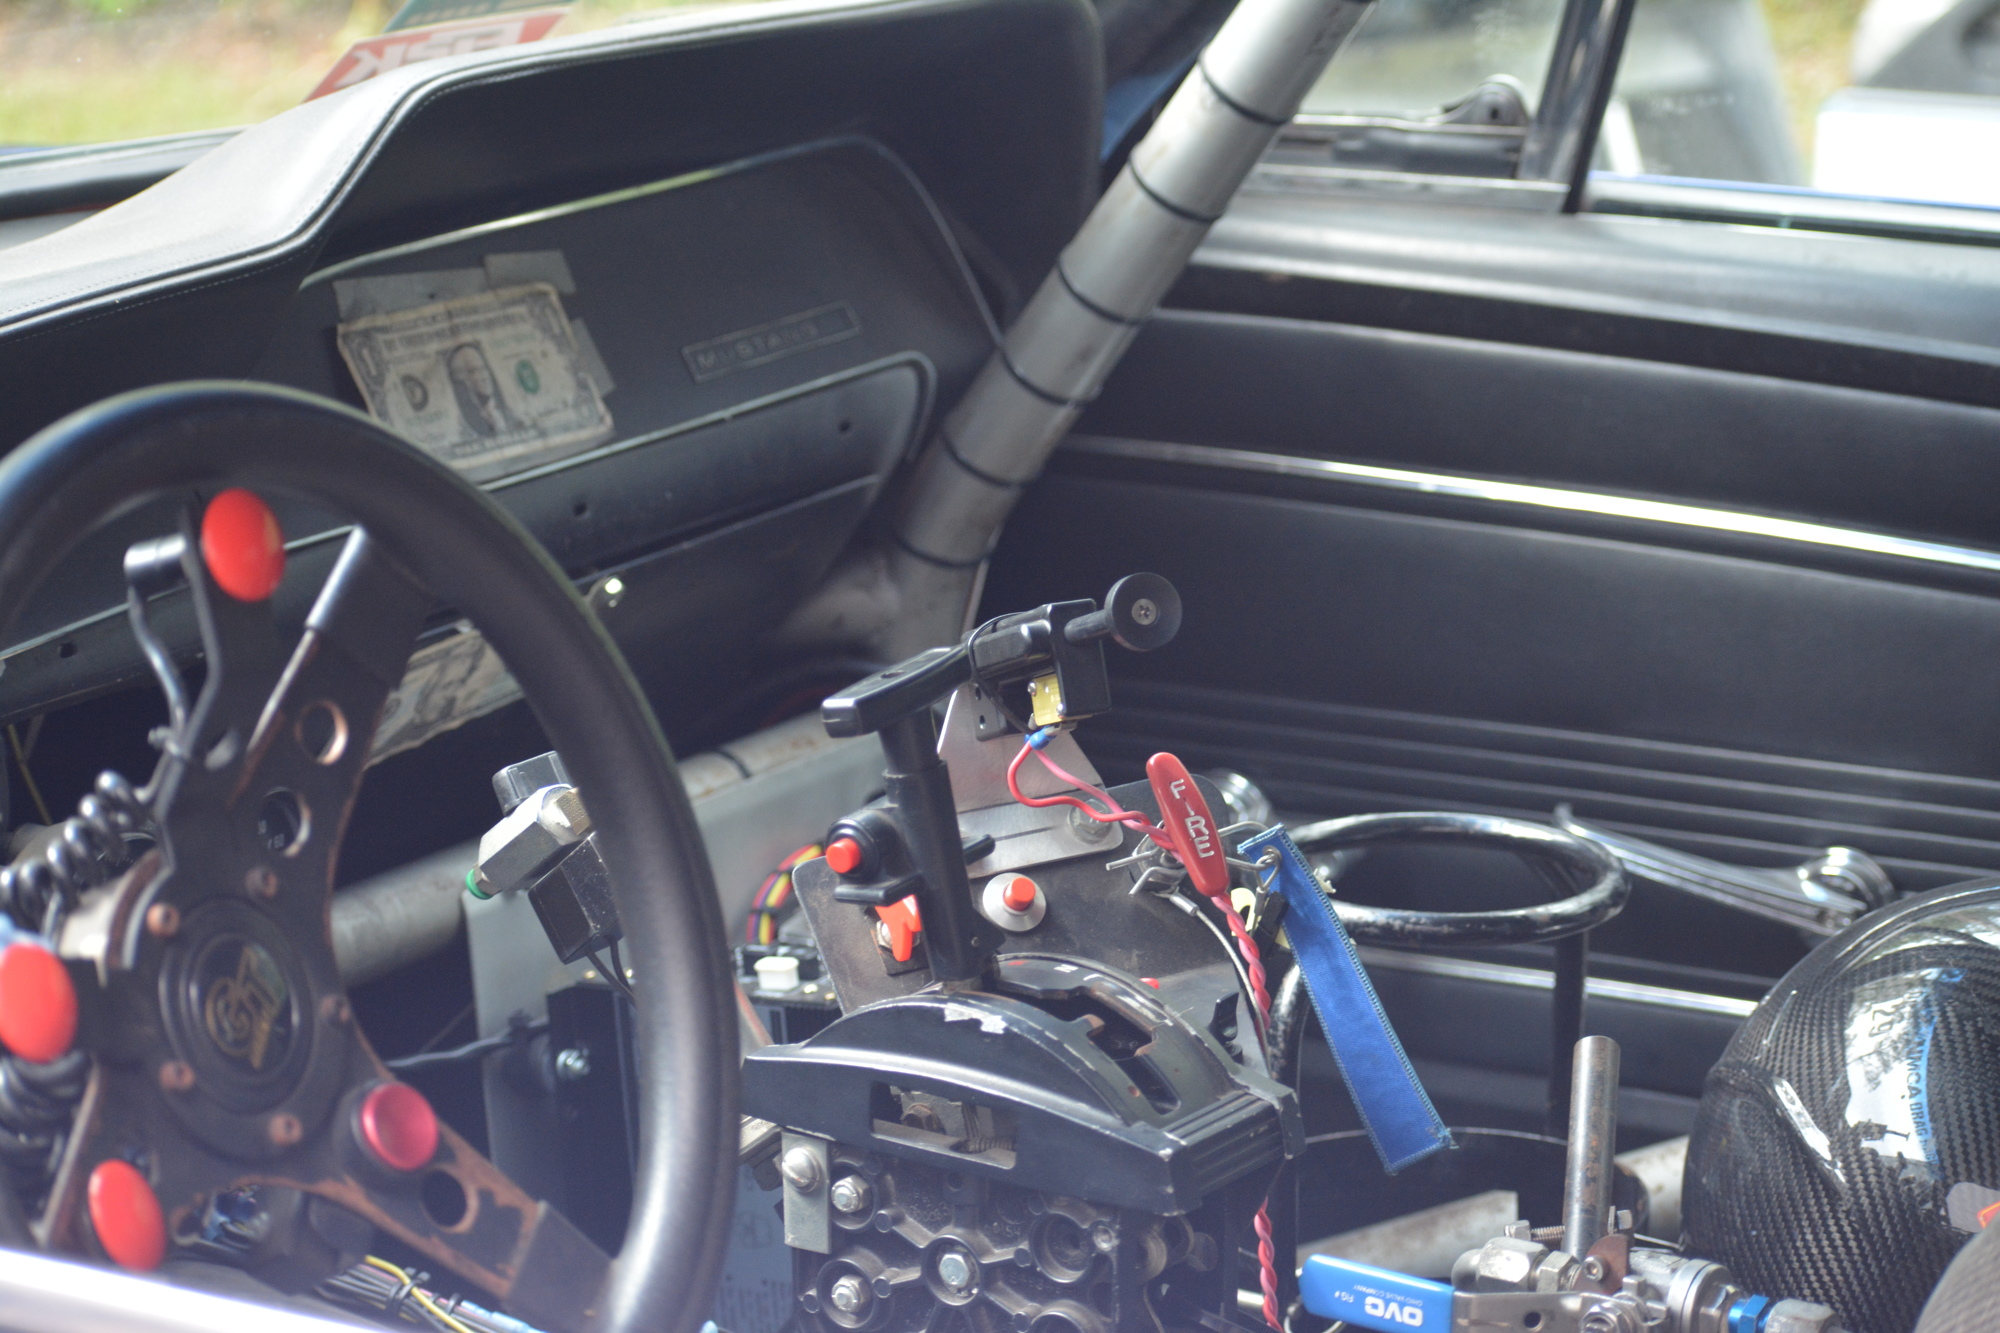 The inside of Faith Frost's 1967 Ford Mustang has everything needed for the drag strip. The car reached 126 mph in her win at FL2K on Oct. 8-9.  (Photo by Ryan Kohn)